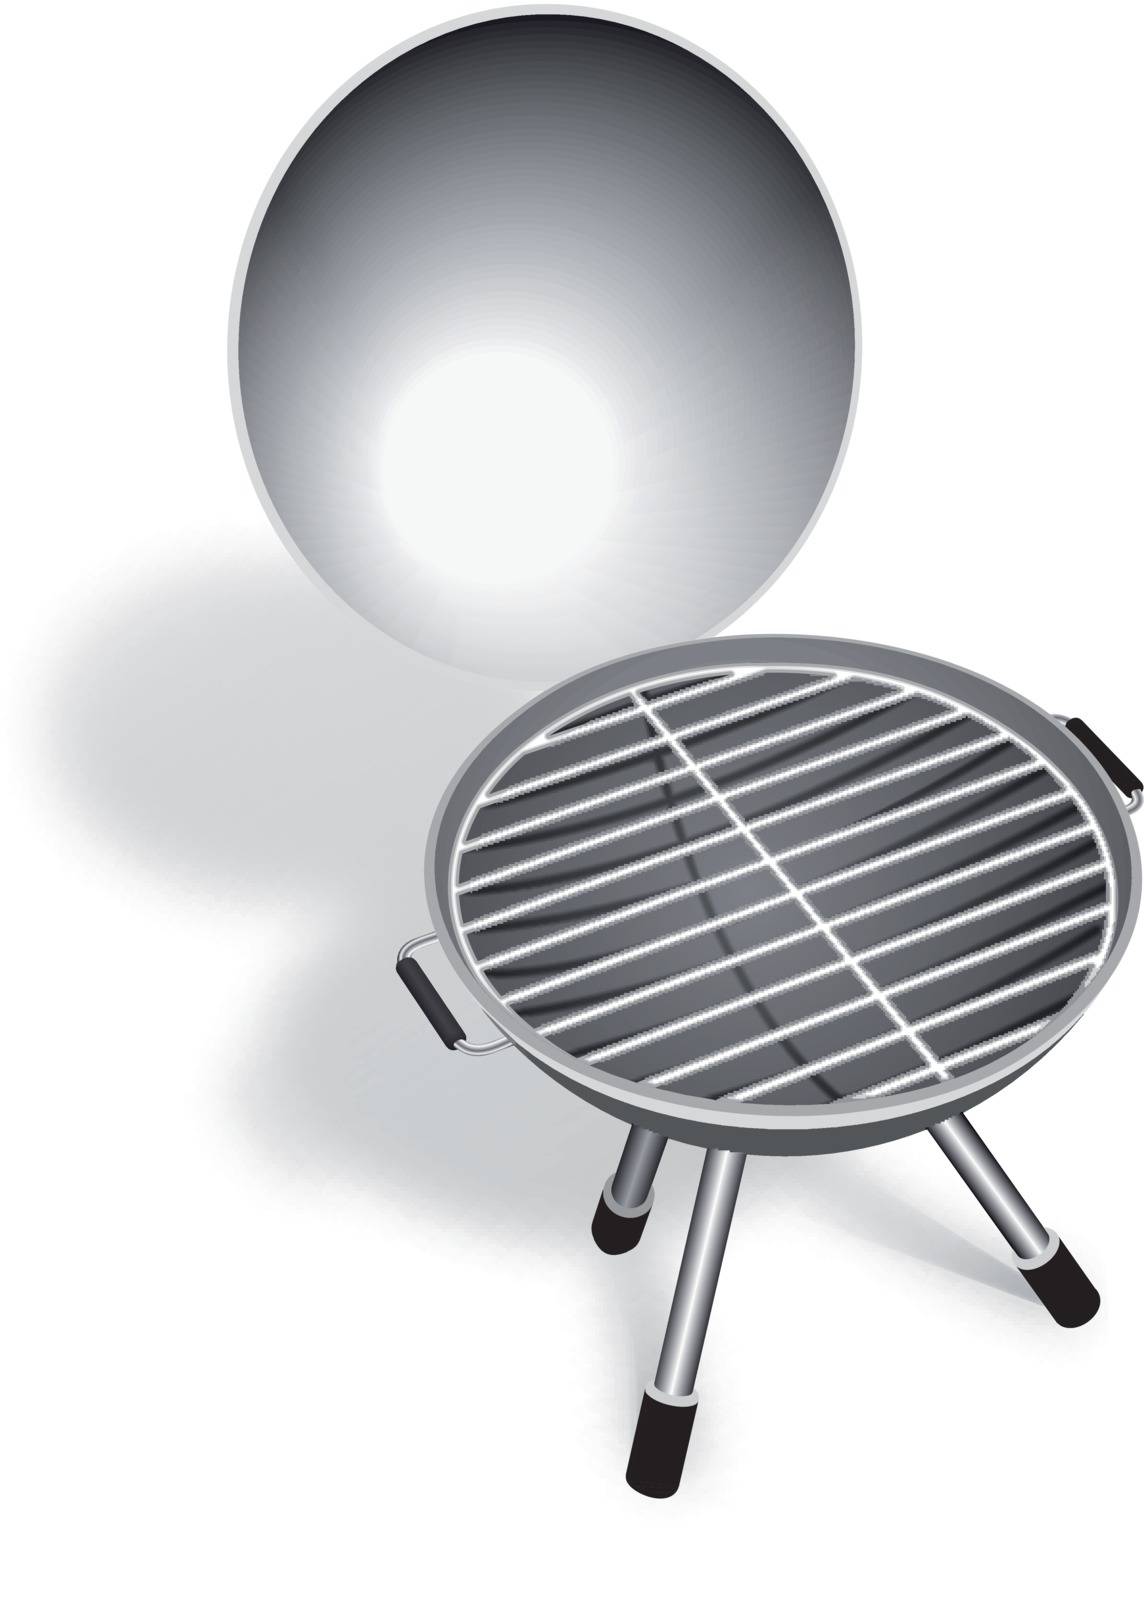 Barbecue grill by sermax55